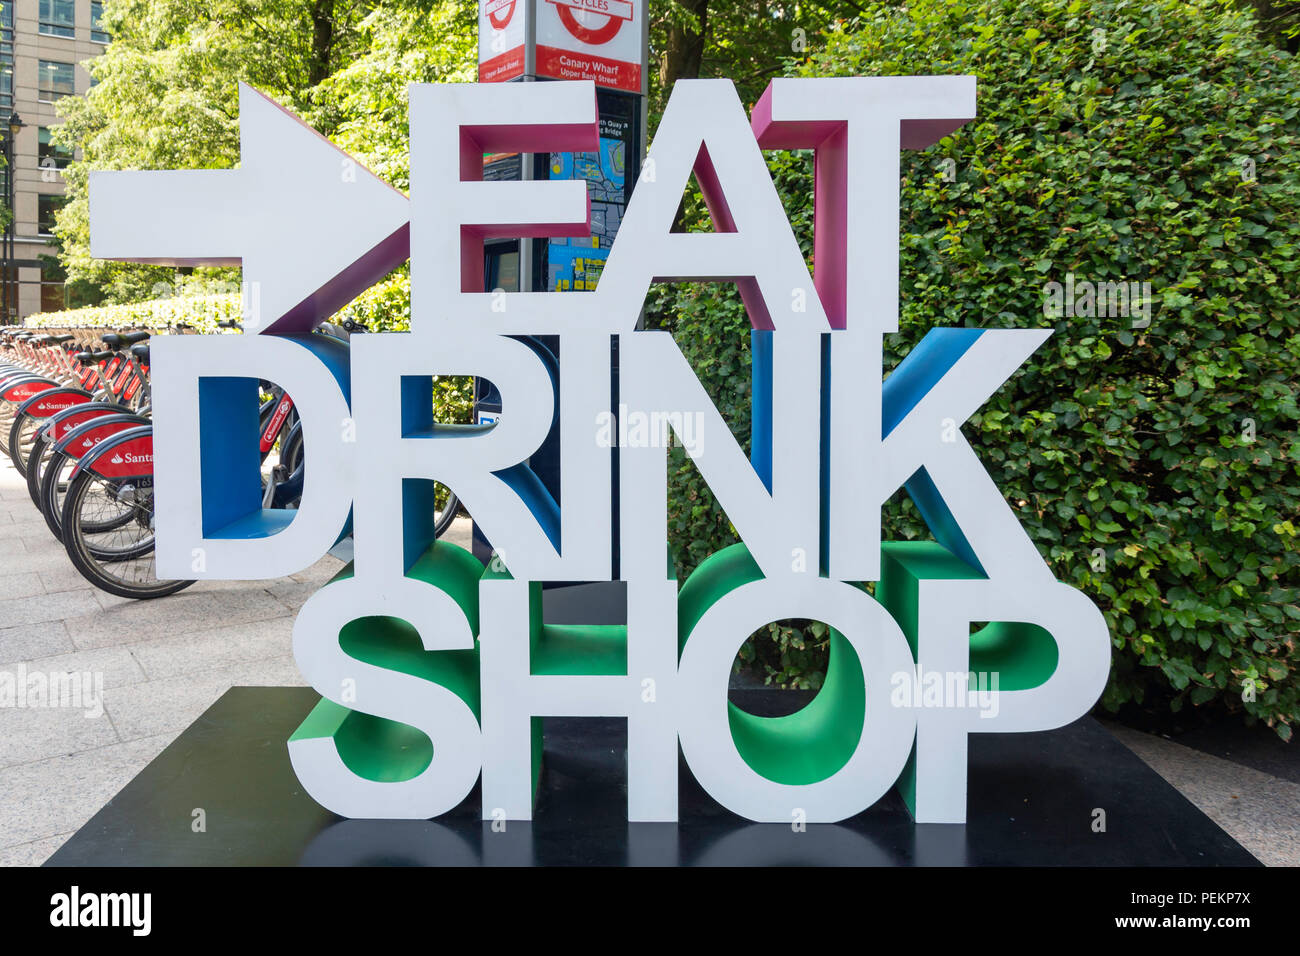 Eat, drink, shop sign in Jubilee Park, Canary Wharf, London Borough of Tower Hamlets, London, Greater London, England, United Kingdom Stock Photo